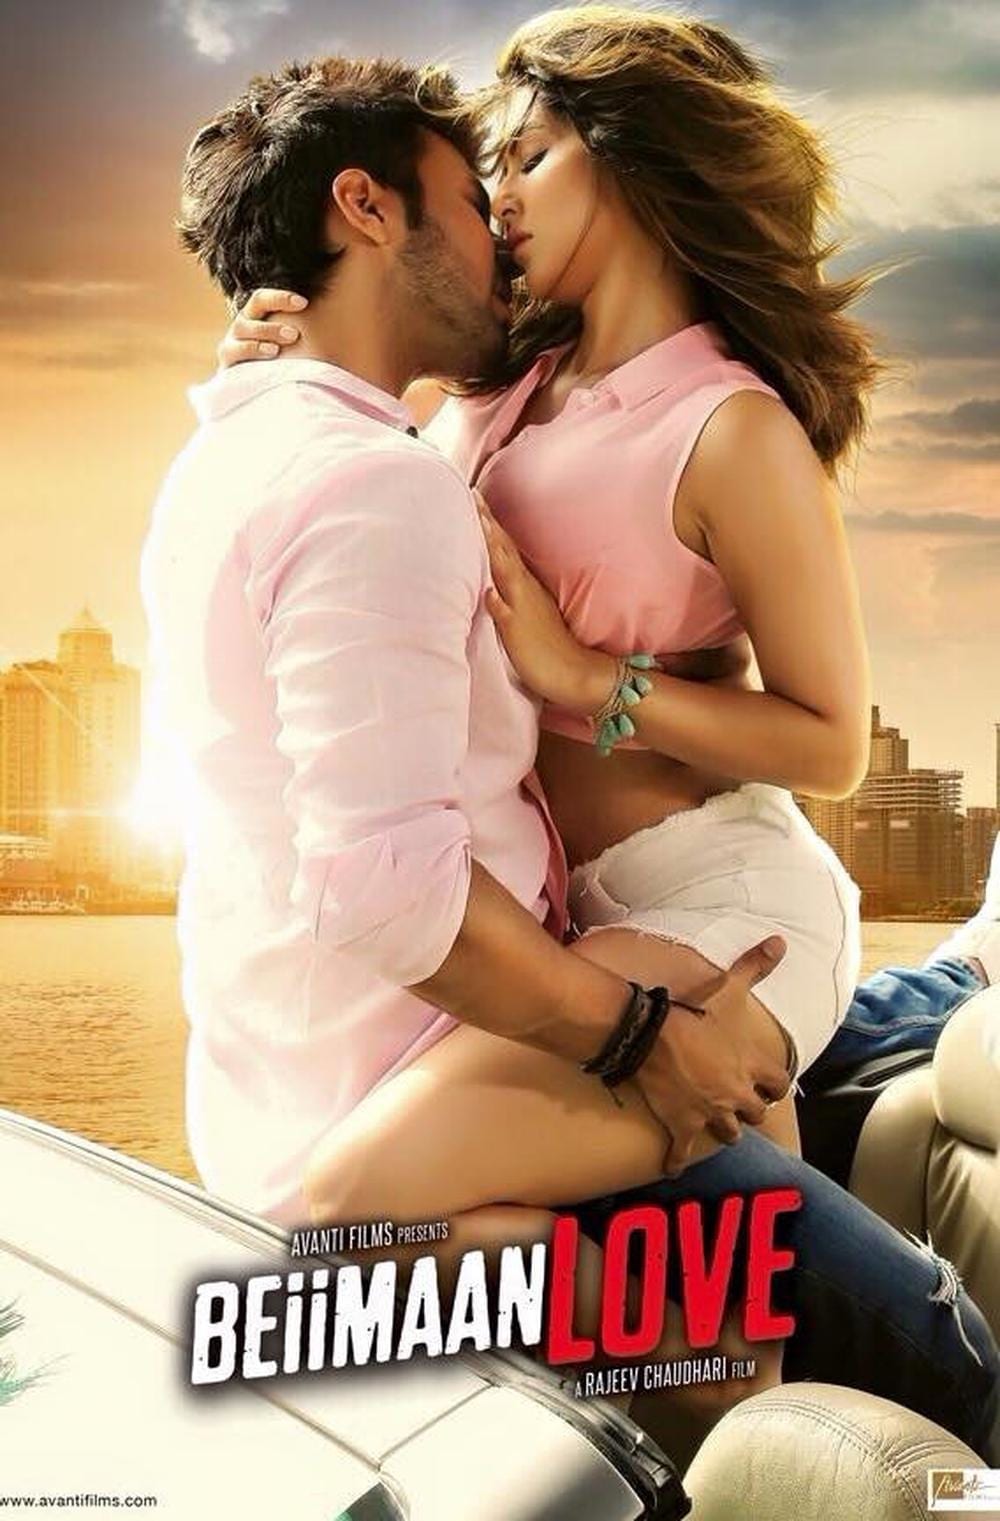 Poster for the movie "Beiimaan Love"